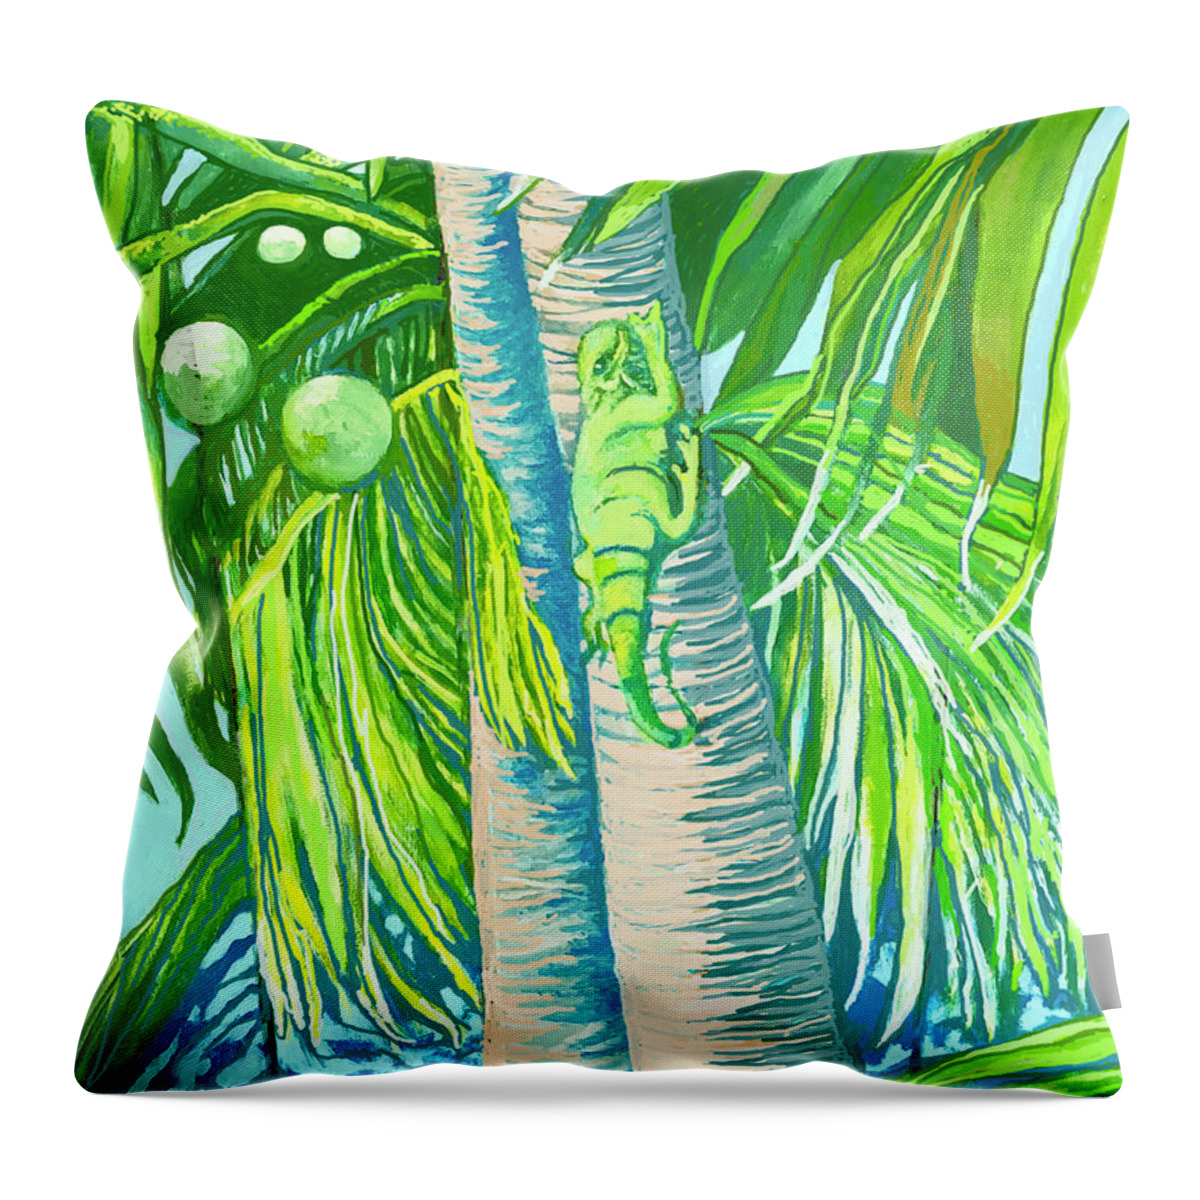 Iguana Throw Pillow featuring the painting Atlantic Blvd by Kandy Cross